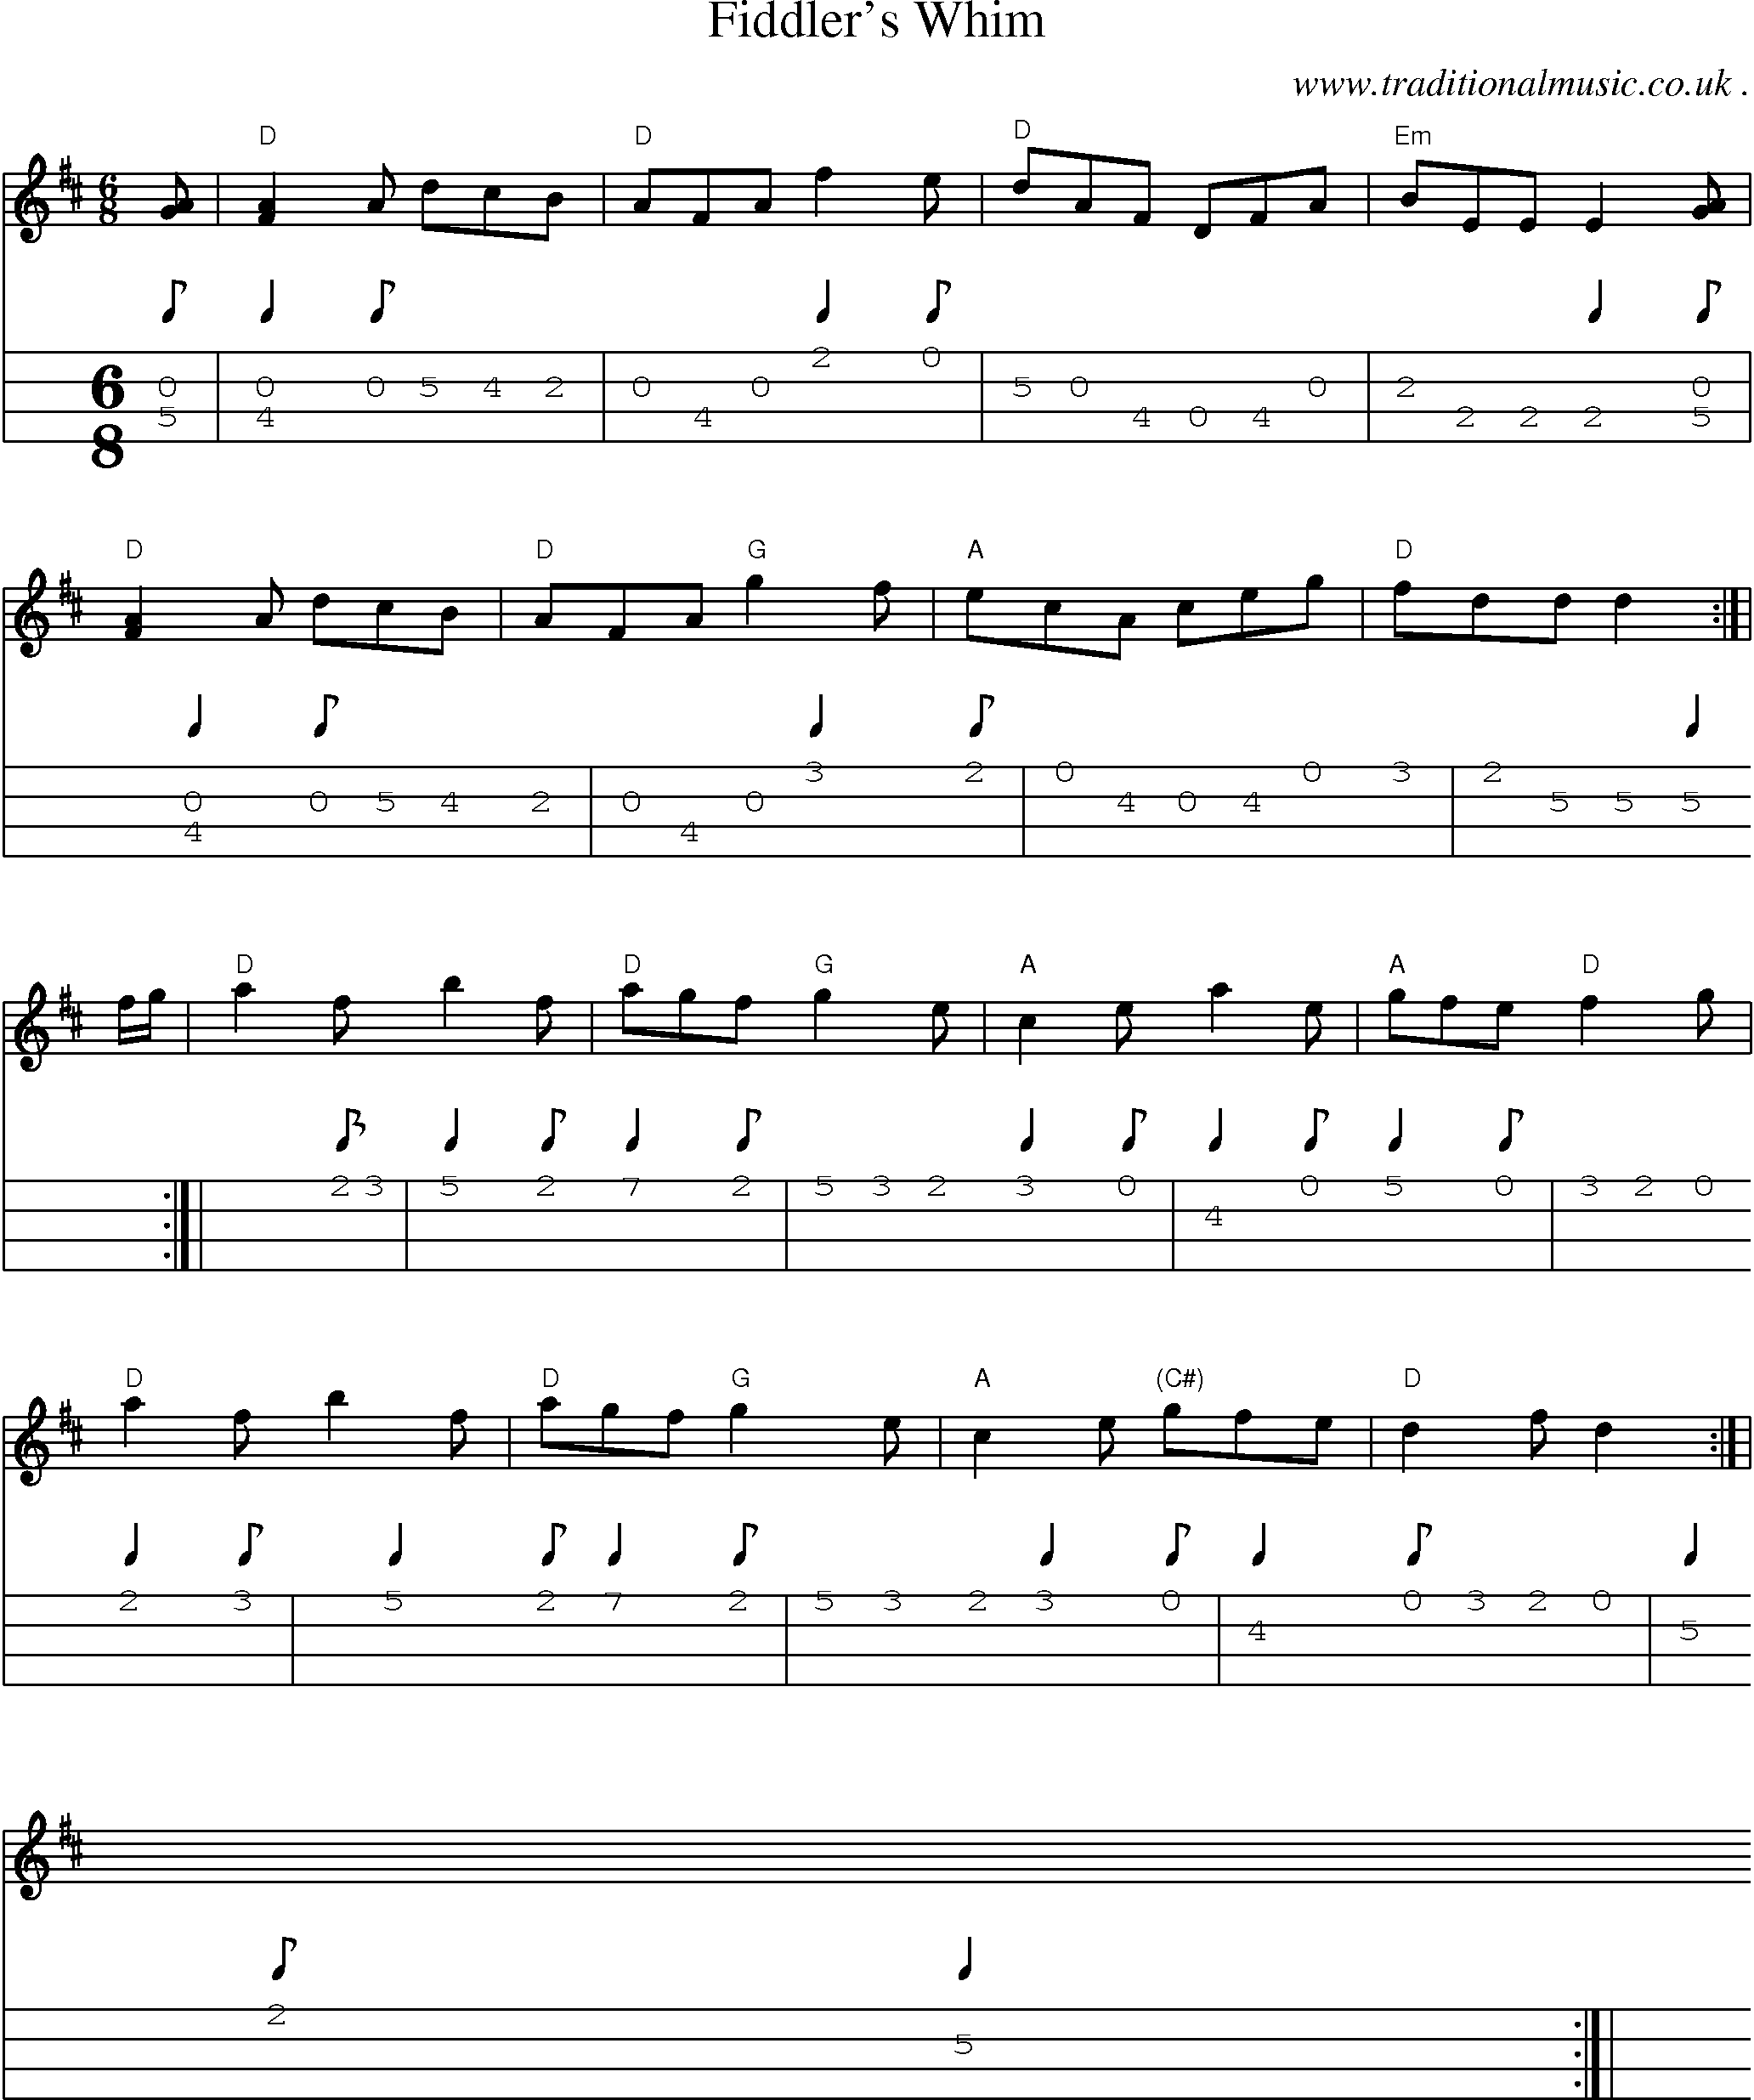 Sheet-music  score, Chords and Mandolin Tabs for Fiddlers Whim